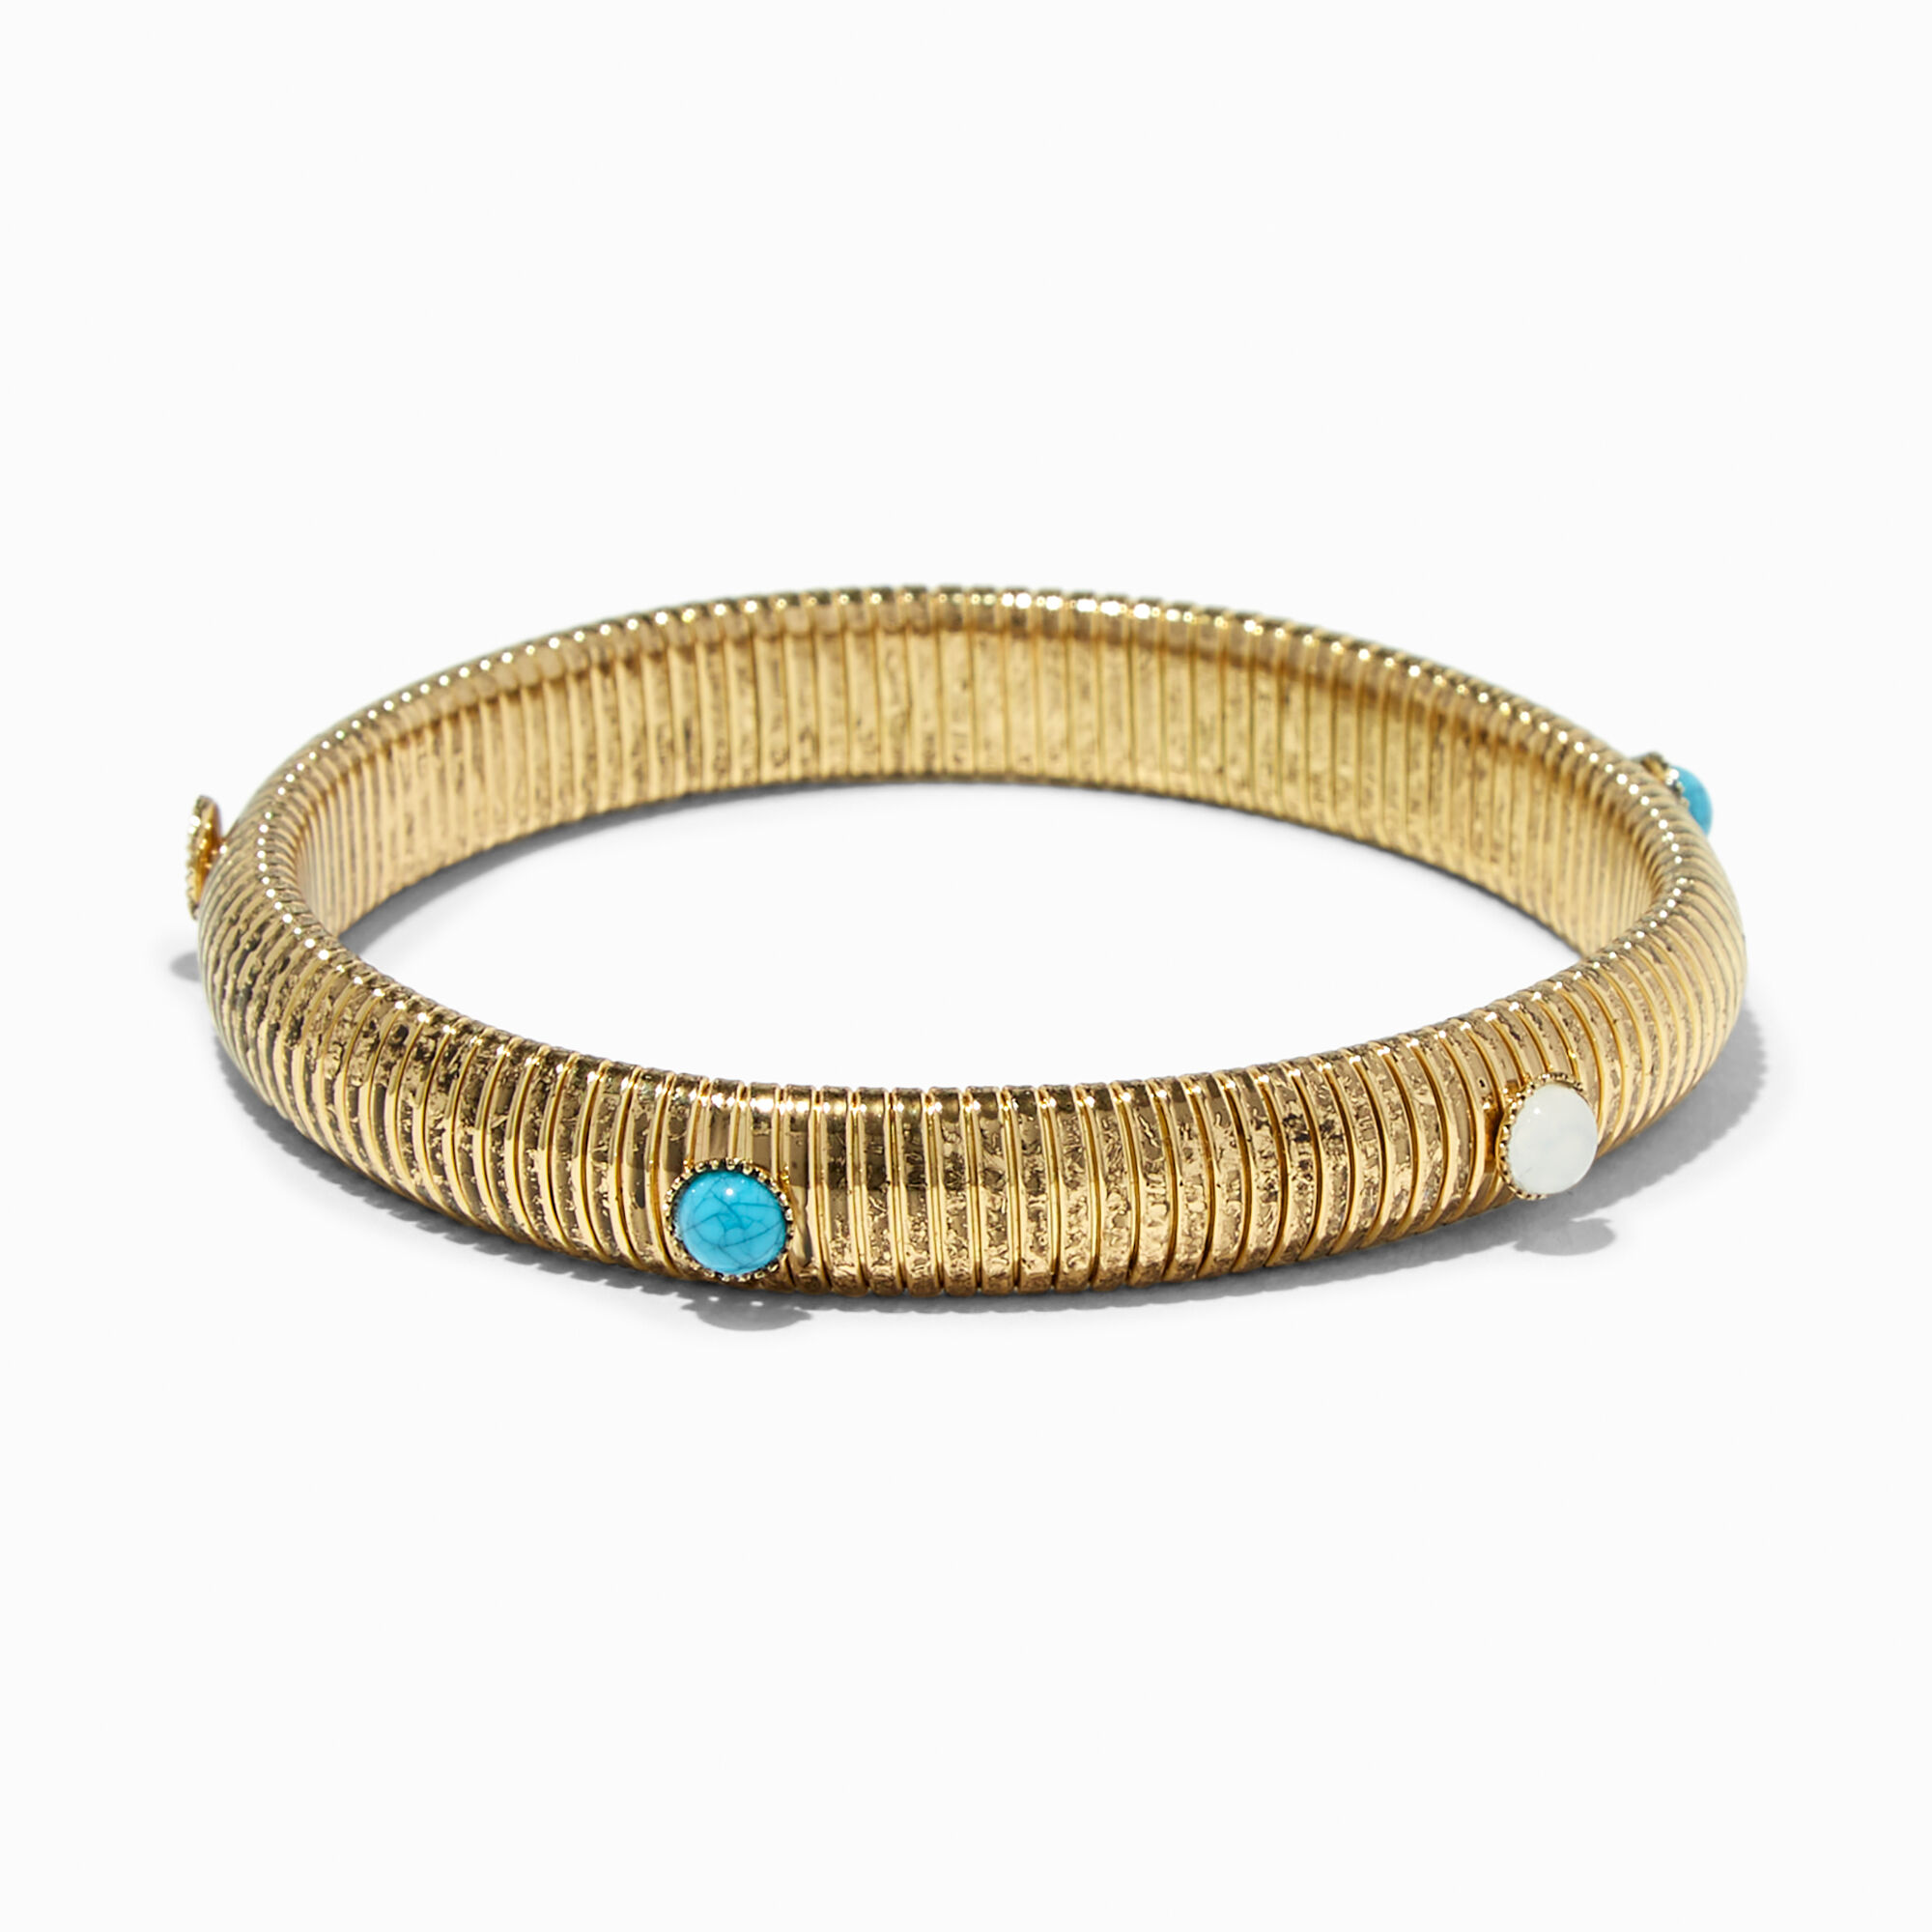 View Claires GoldTone Stone Watch Strap Stretch Bracelet Turquoise information